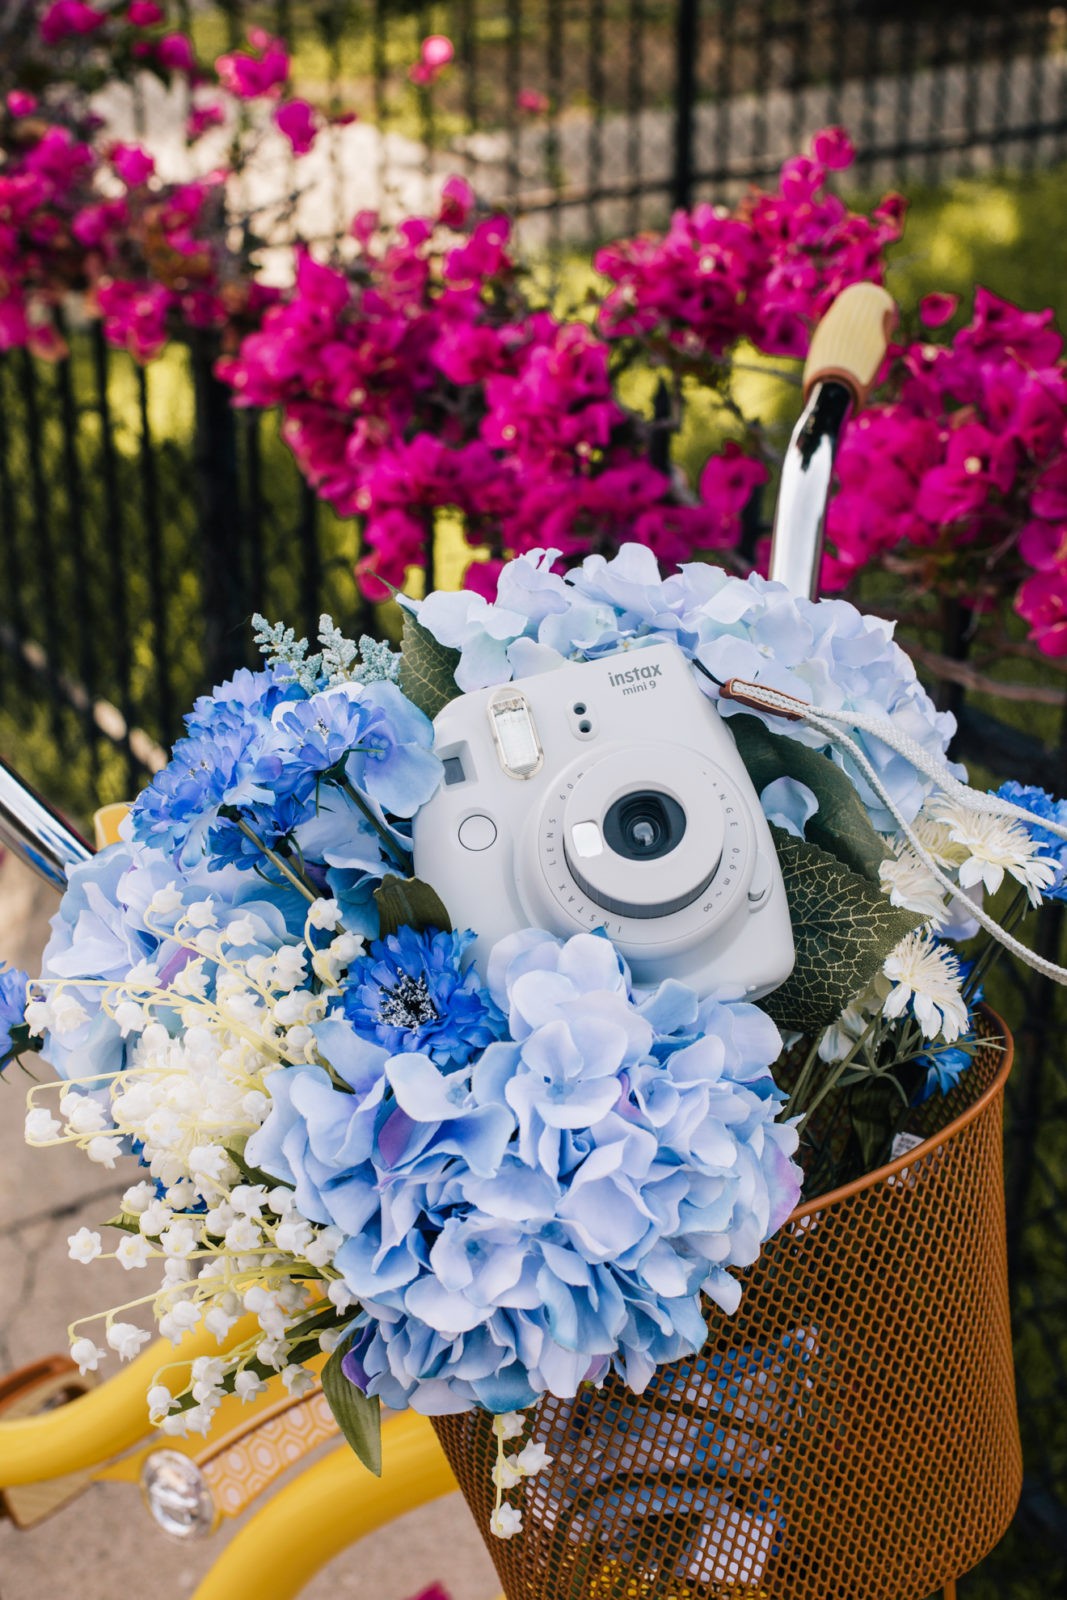 Stage Summer Moments, 2019 Summer Bucket List Moments by popular Los Angeles Lifestyle Blogger Laura Lily: image of Stage Stores yellow beach cruiser bike with bike basket full of flowers and gray Polaroid Instax mini camera.